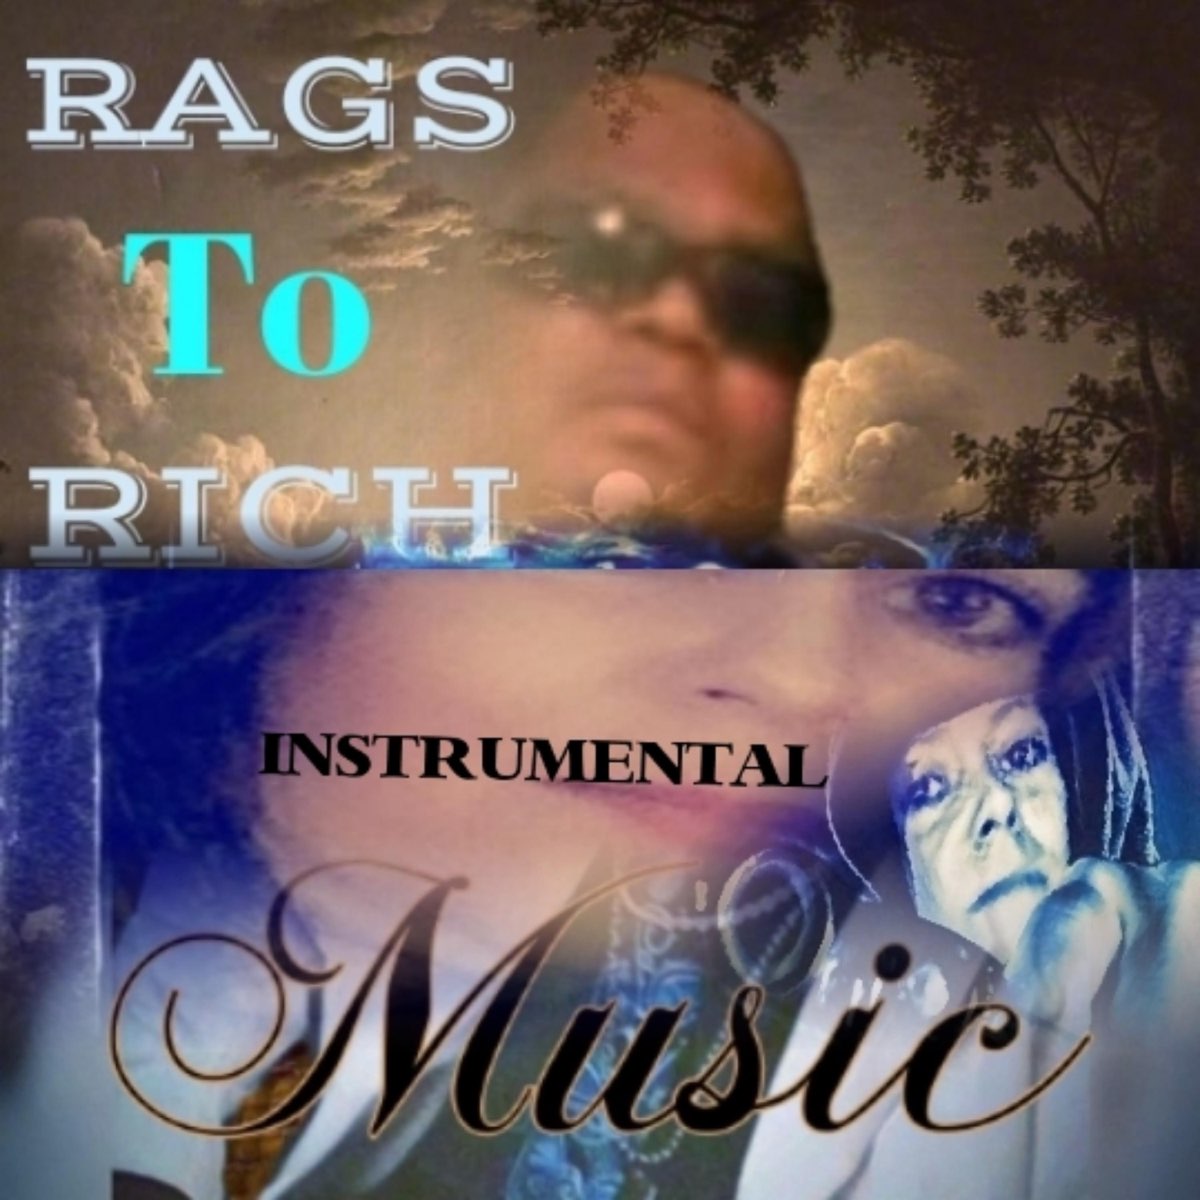 Rags2rich (Instrumentals) [Instrumental] - EP by Hamp D.O.G on 